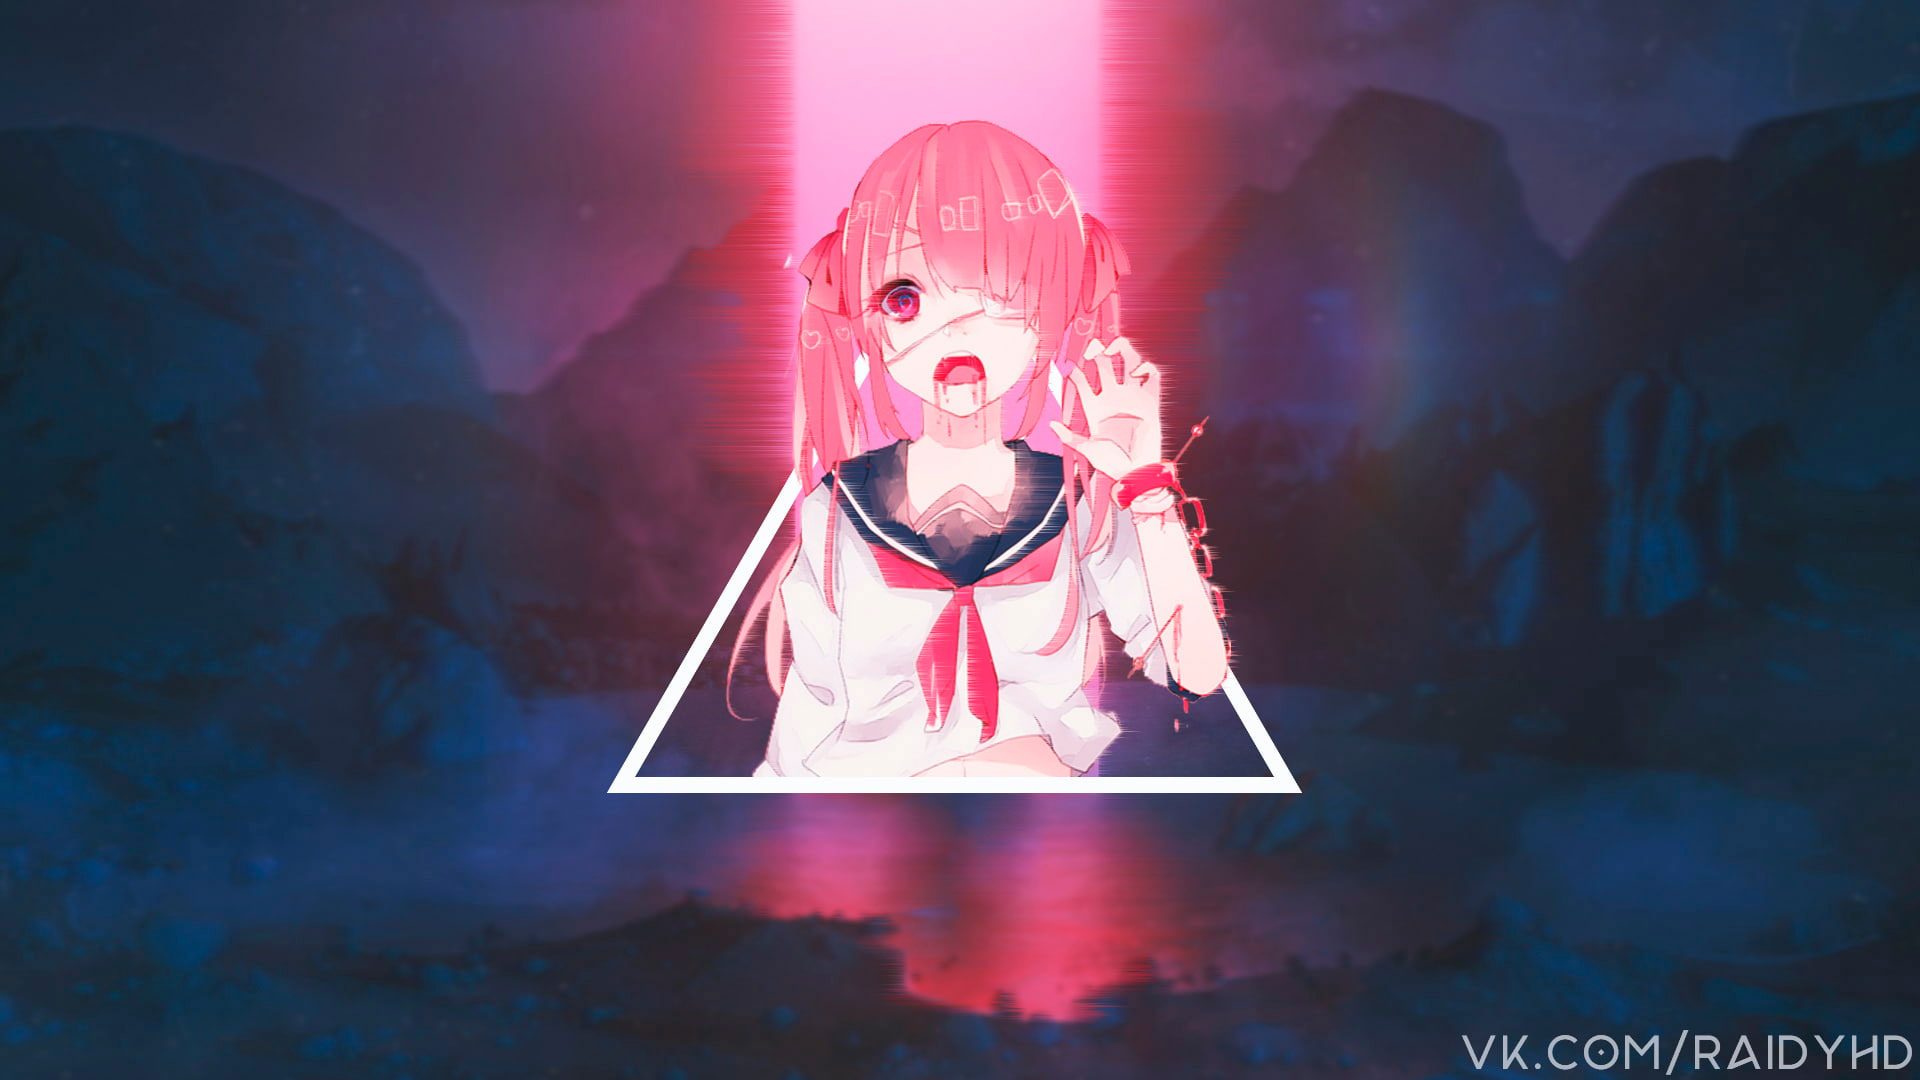 Anime Wallpaper, Anime Girls, Glitch Art, Picture In Picture, Front View • Wallpaper For You HD Wallpaper For Desktop & Mobile